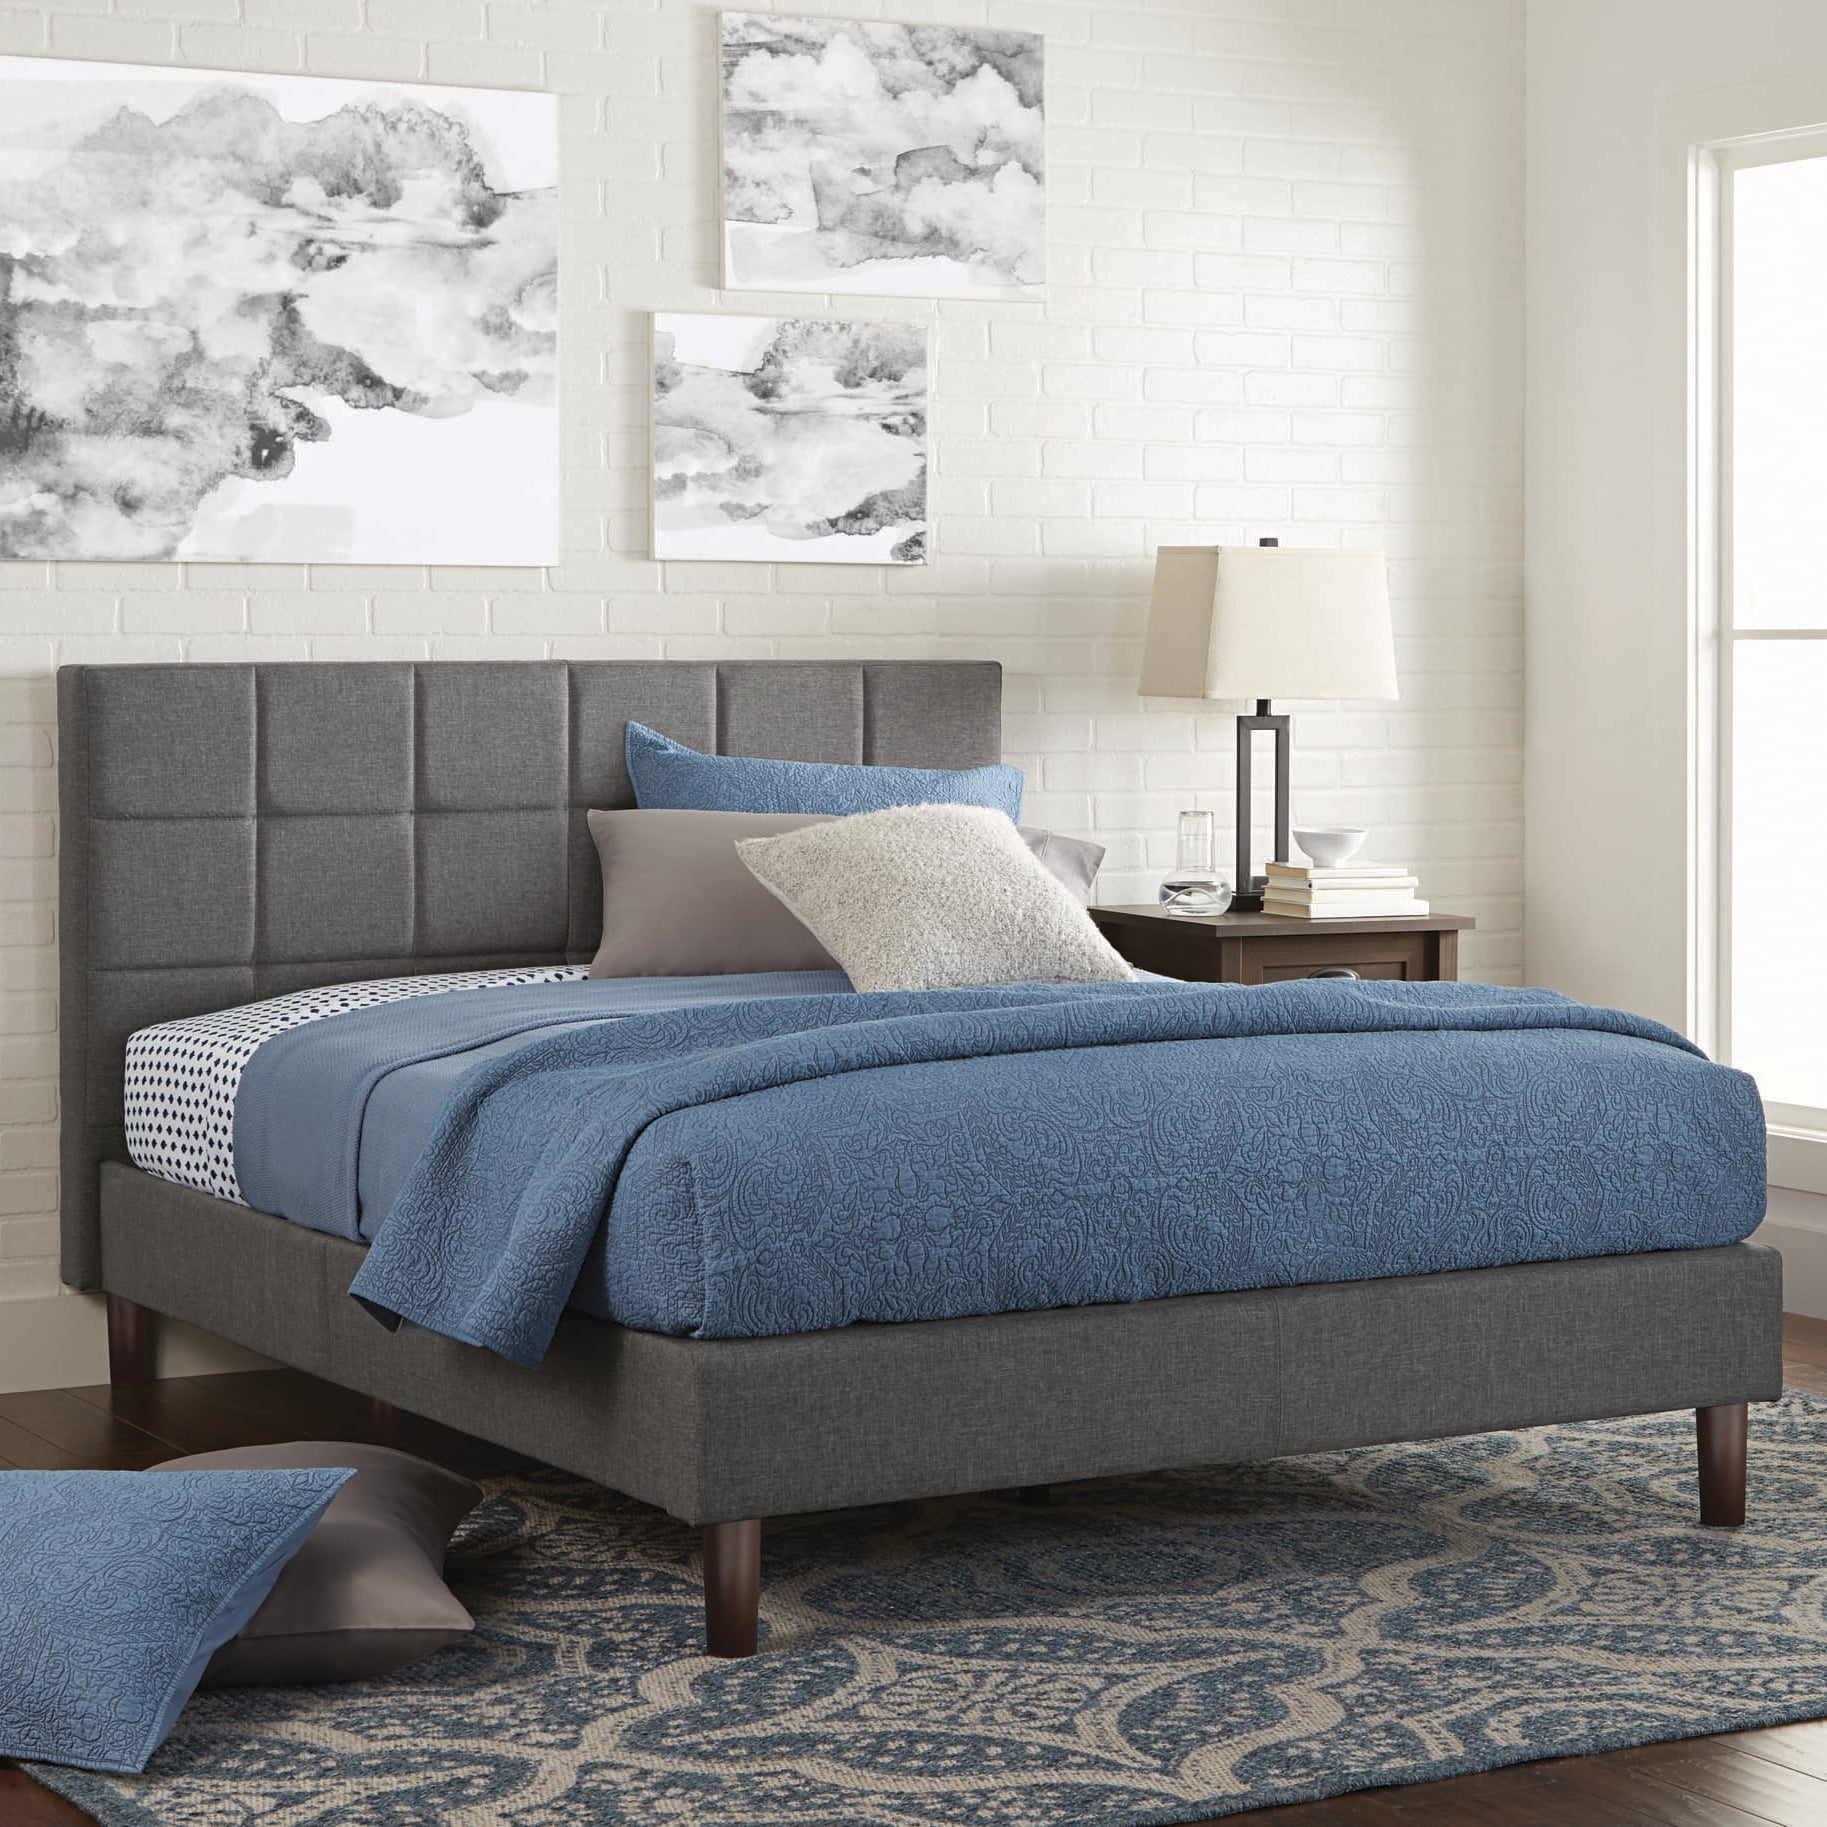 Grey Kteam Full Size Modern Wood Platform Bed with headboard No Box Spring Needed Wood Support Platform Bed